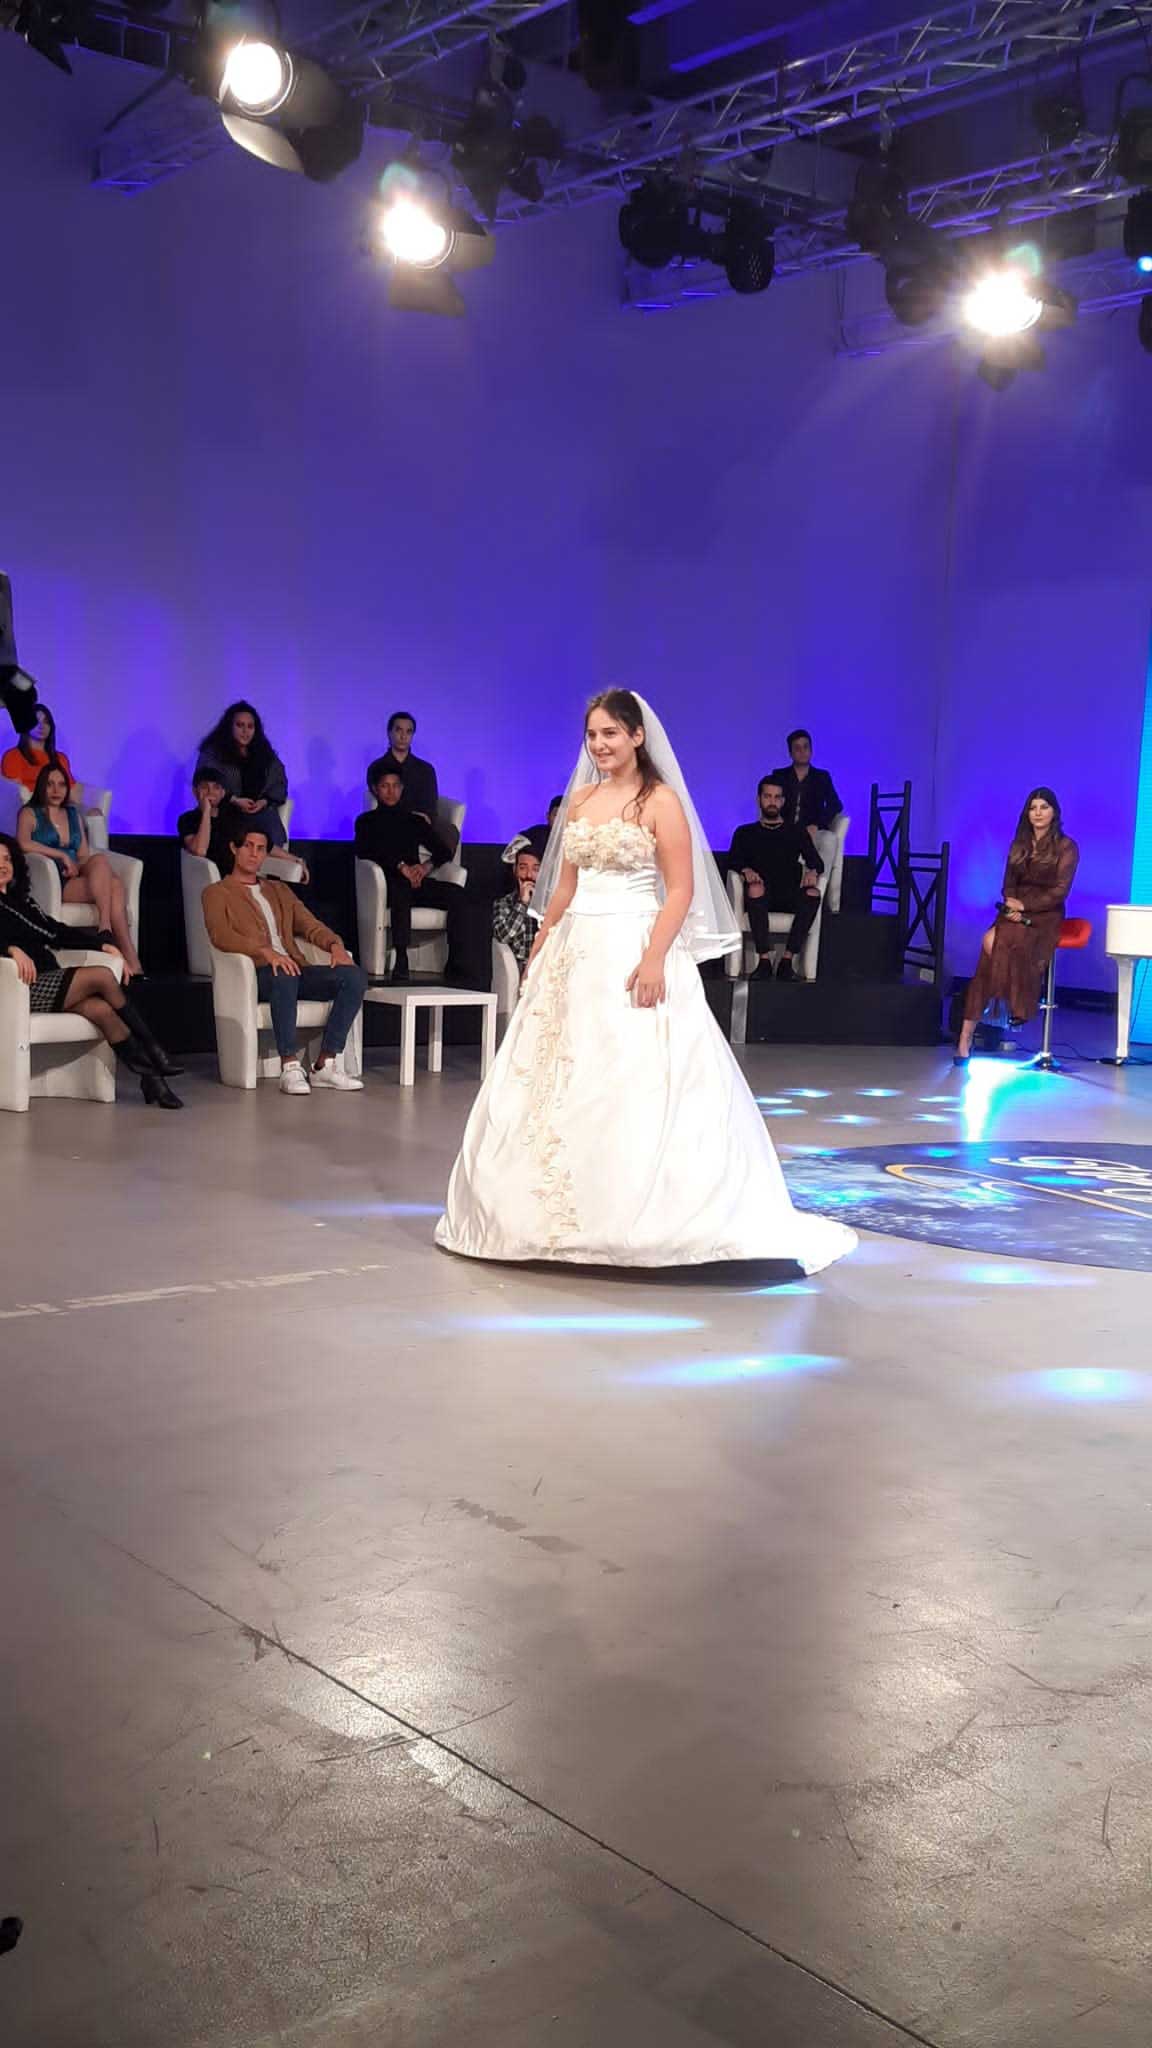 Customize women suits made in Italy clothing models on the catwalk Elins presents shopping online wedding fashion dresses on italian dream / Gold TV - photo15